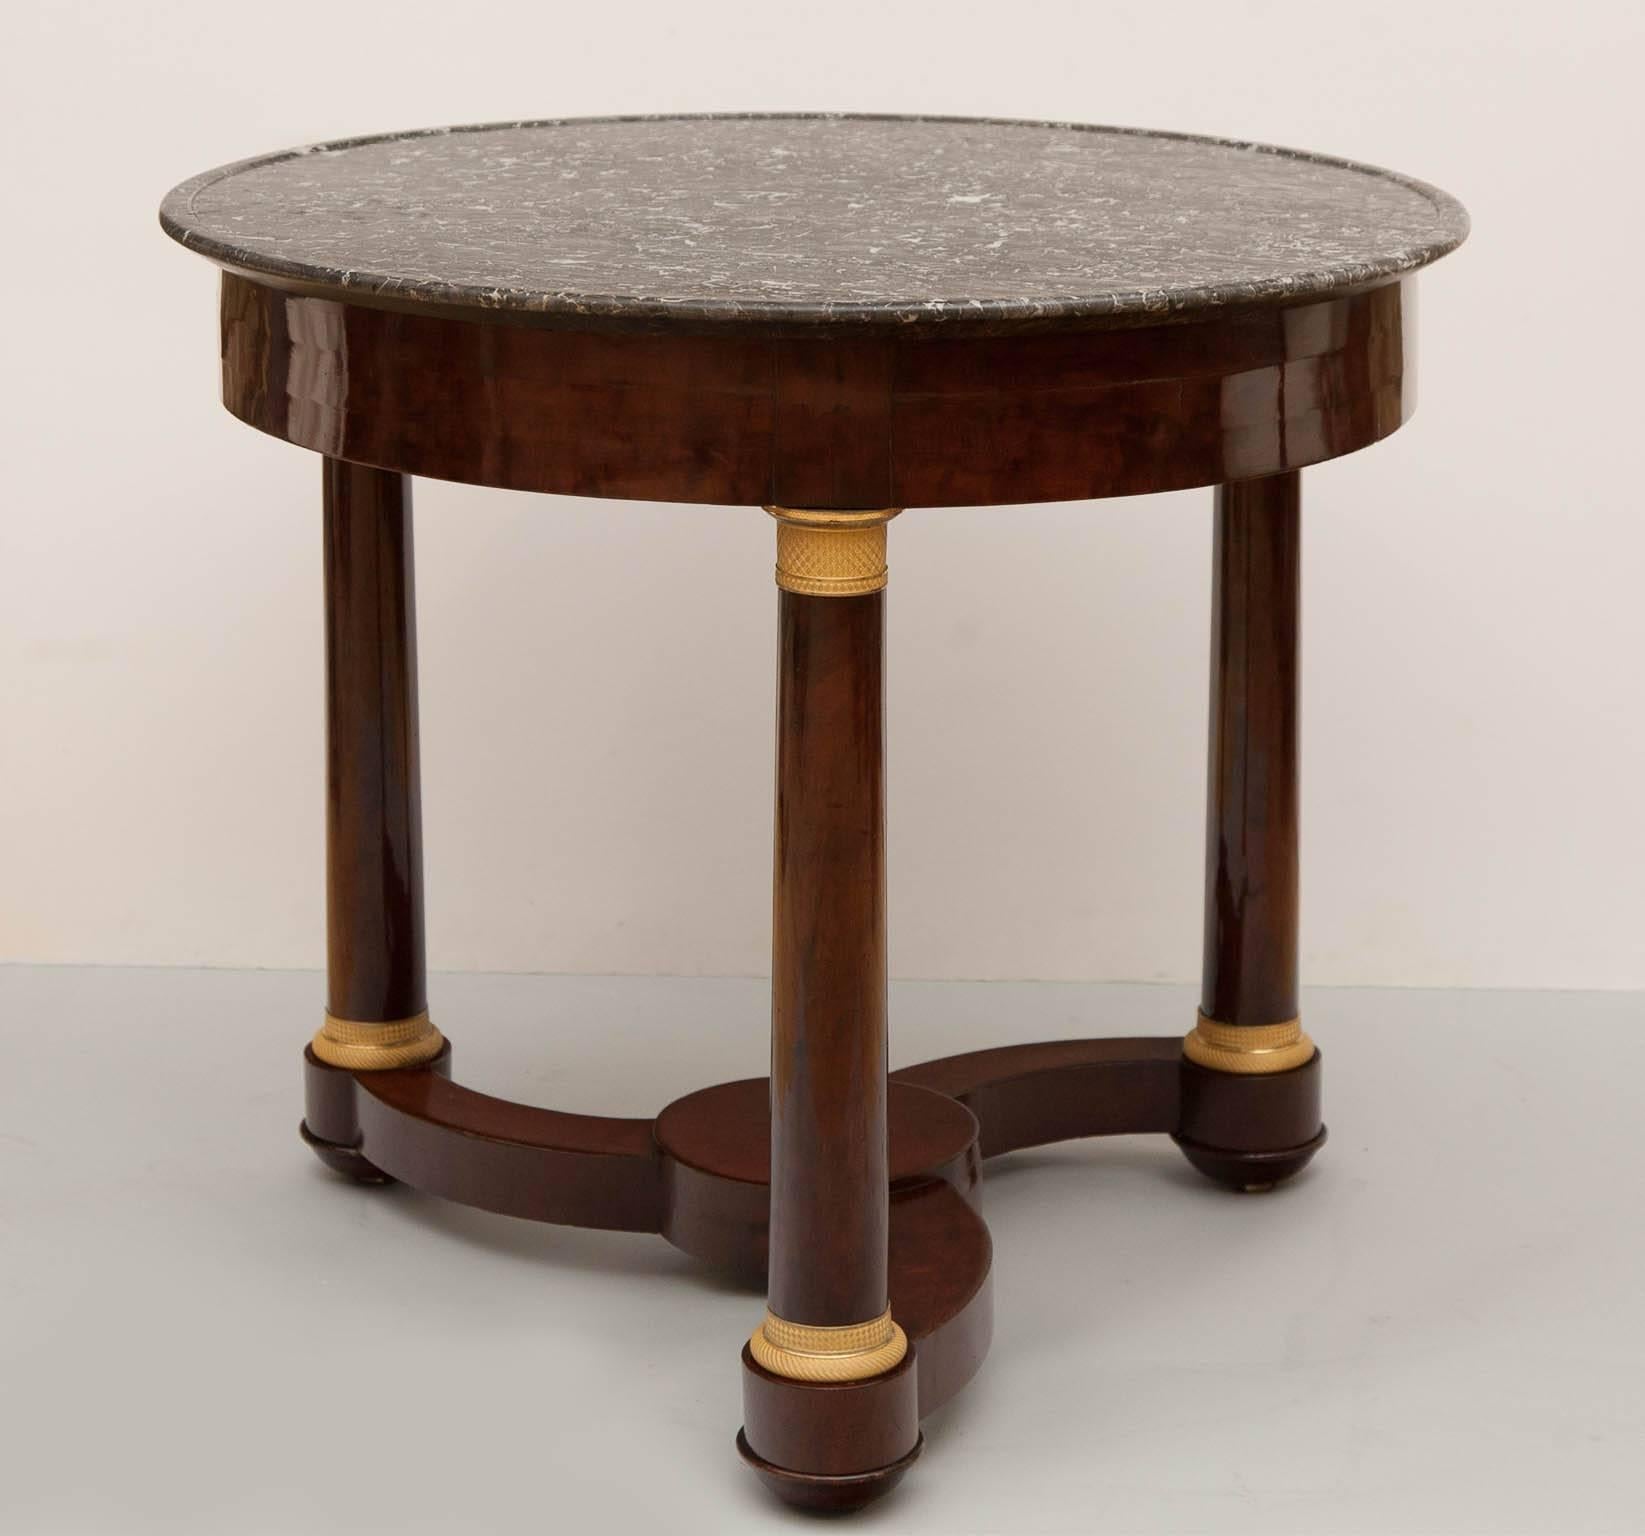 Mahogany and mahogany veneer gueridon on three legs with a triform base. 
Finely incised gilt bronze mounts, a grey and white marble top with a 'cuvette' edge. 
France c. 1820.